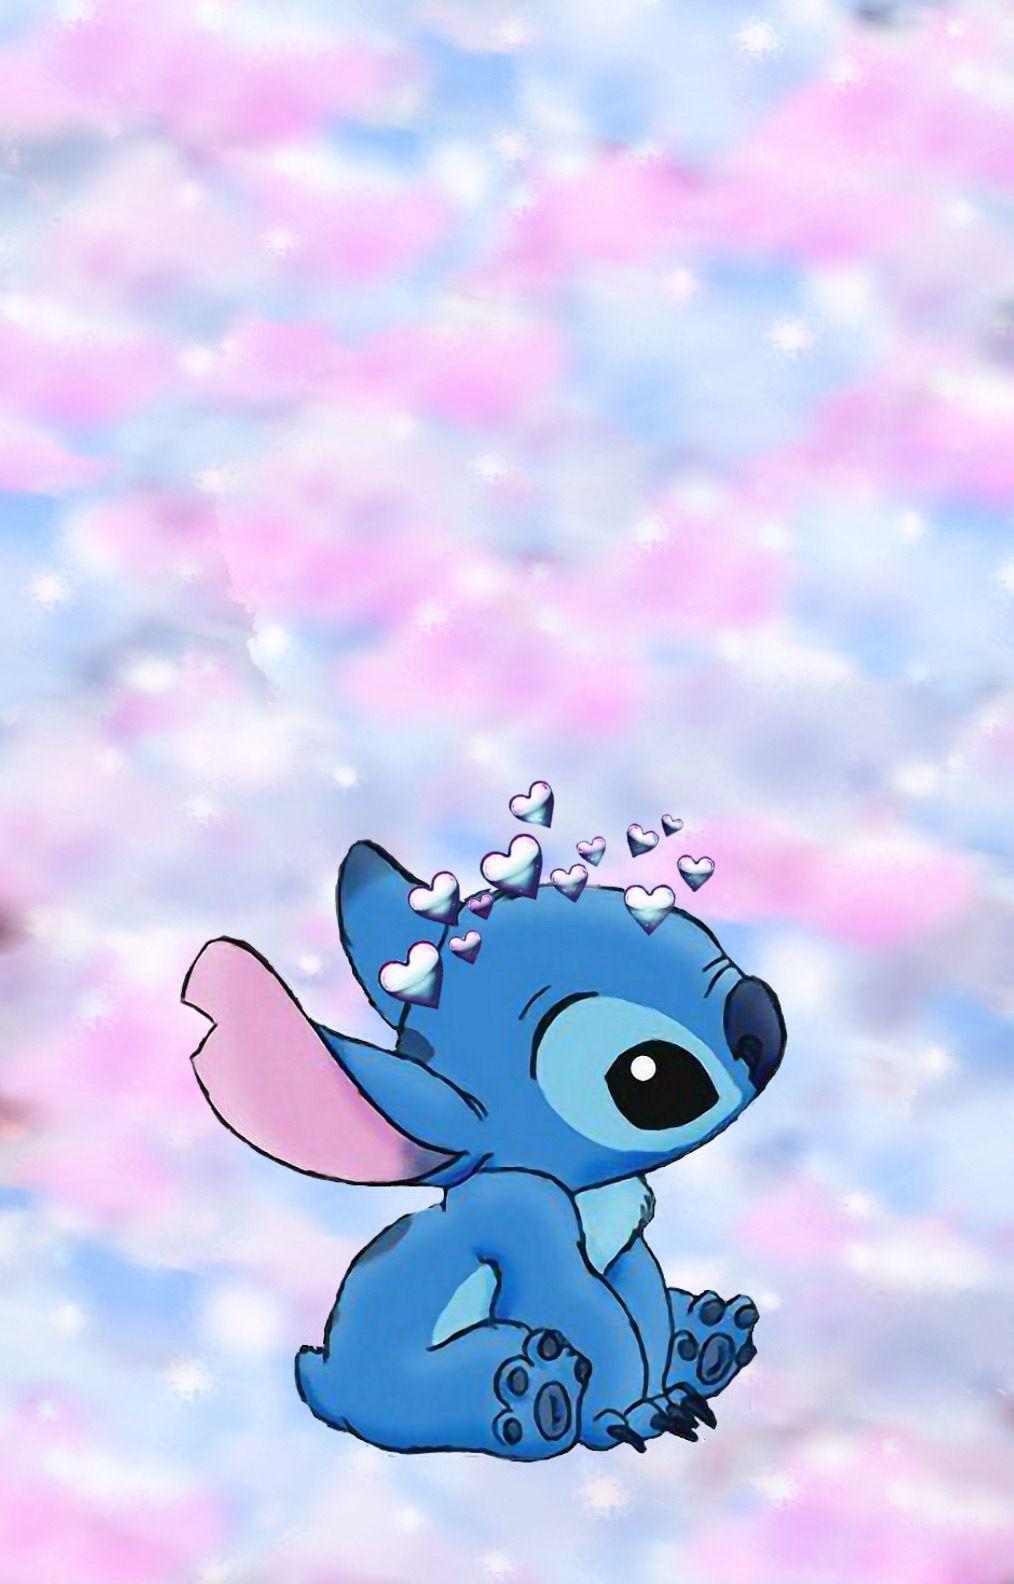 Cute Aesthetic Stitch Wallpapers - Top Free Cute Aesthetic Stitch ...